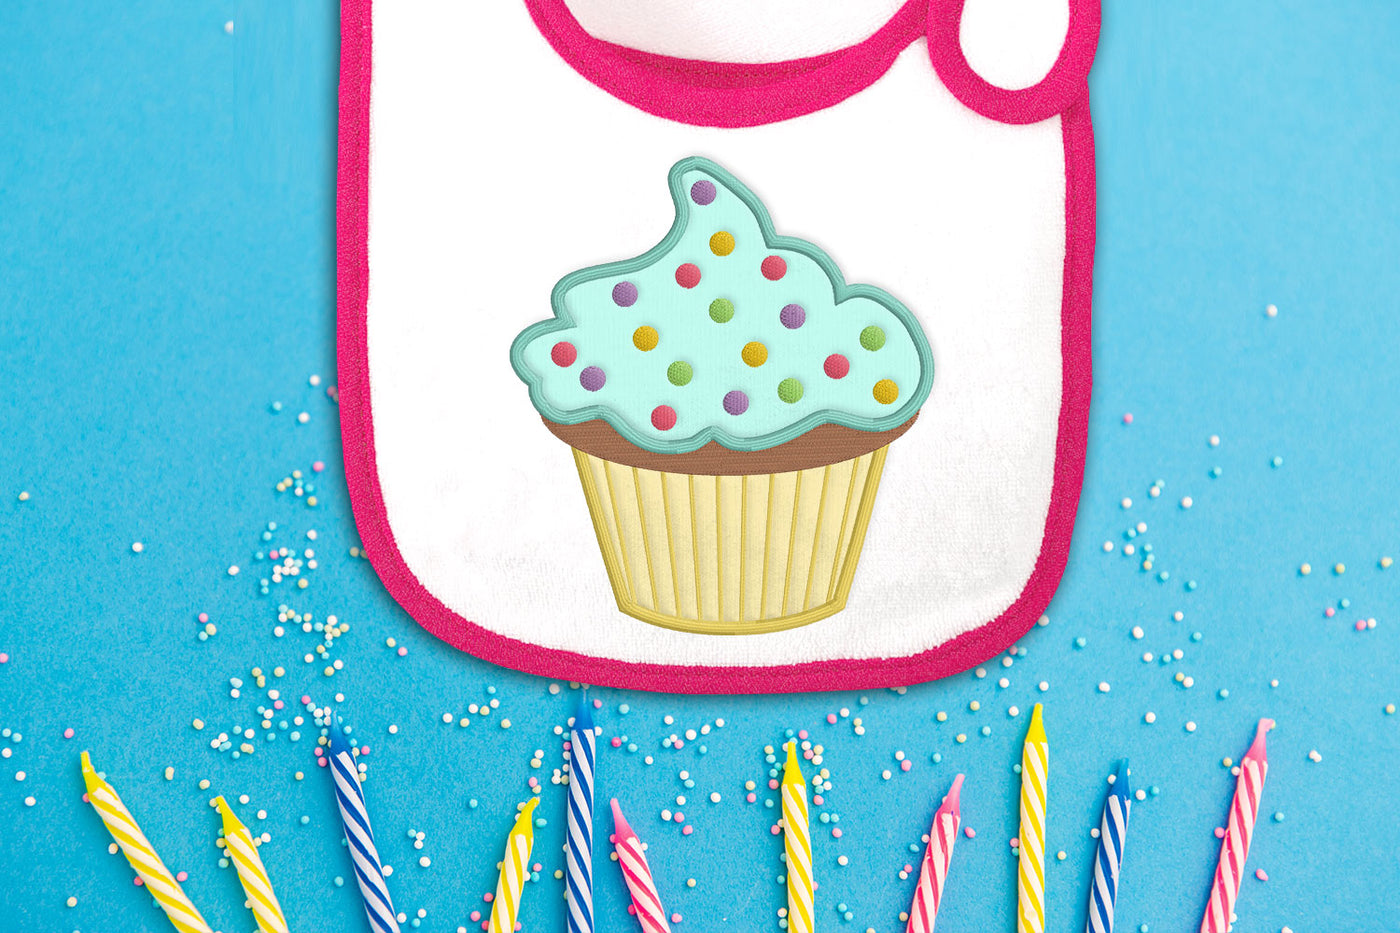 Cupcake with Sprinkles Applique